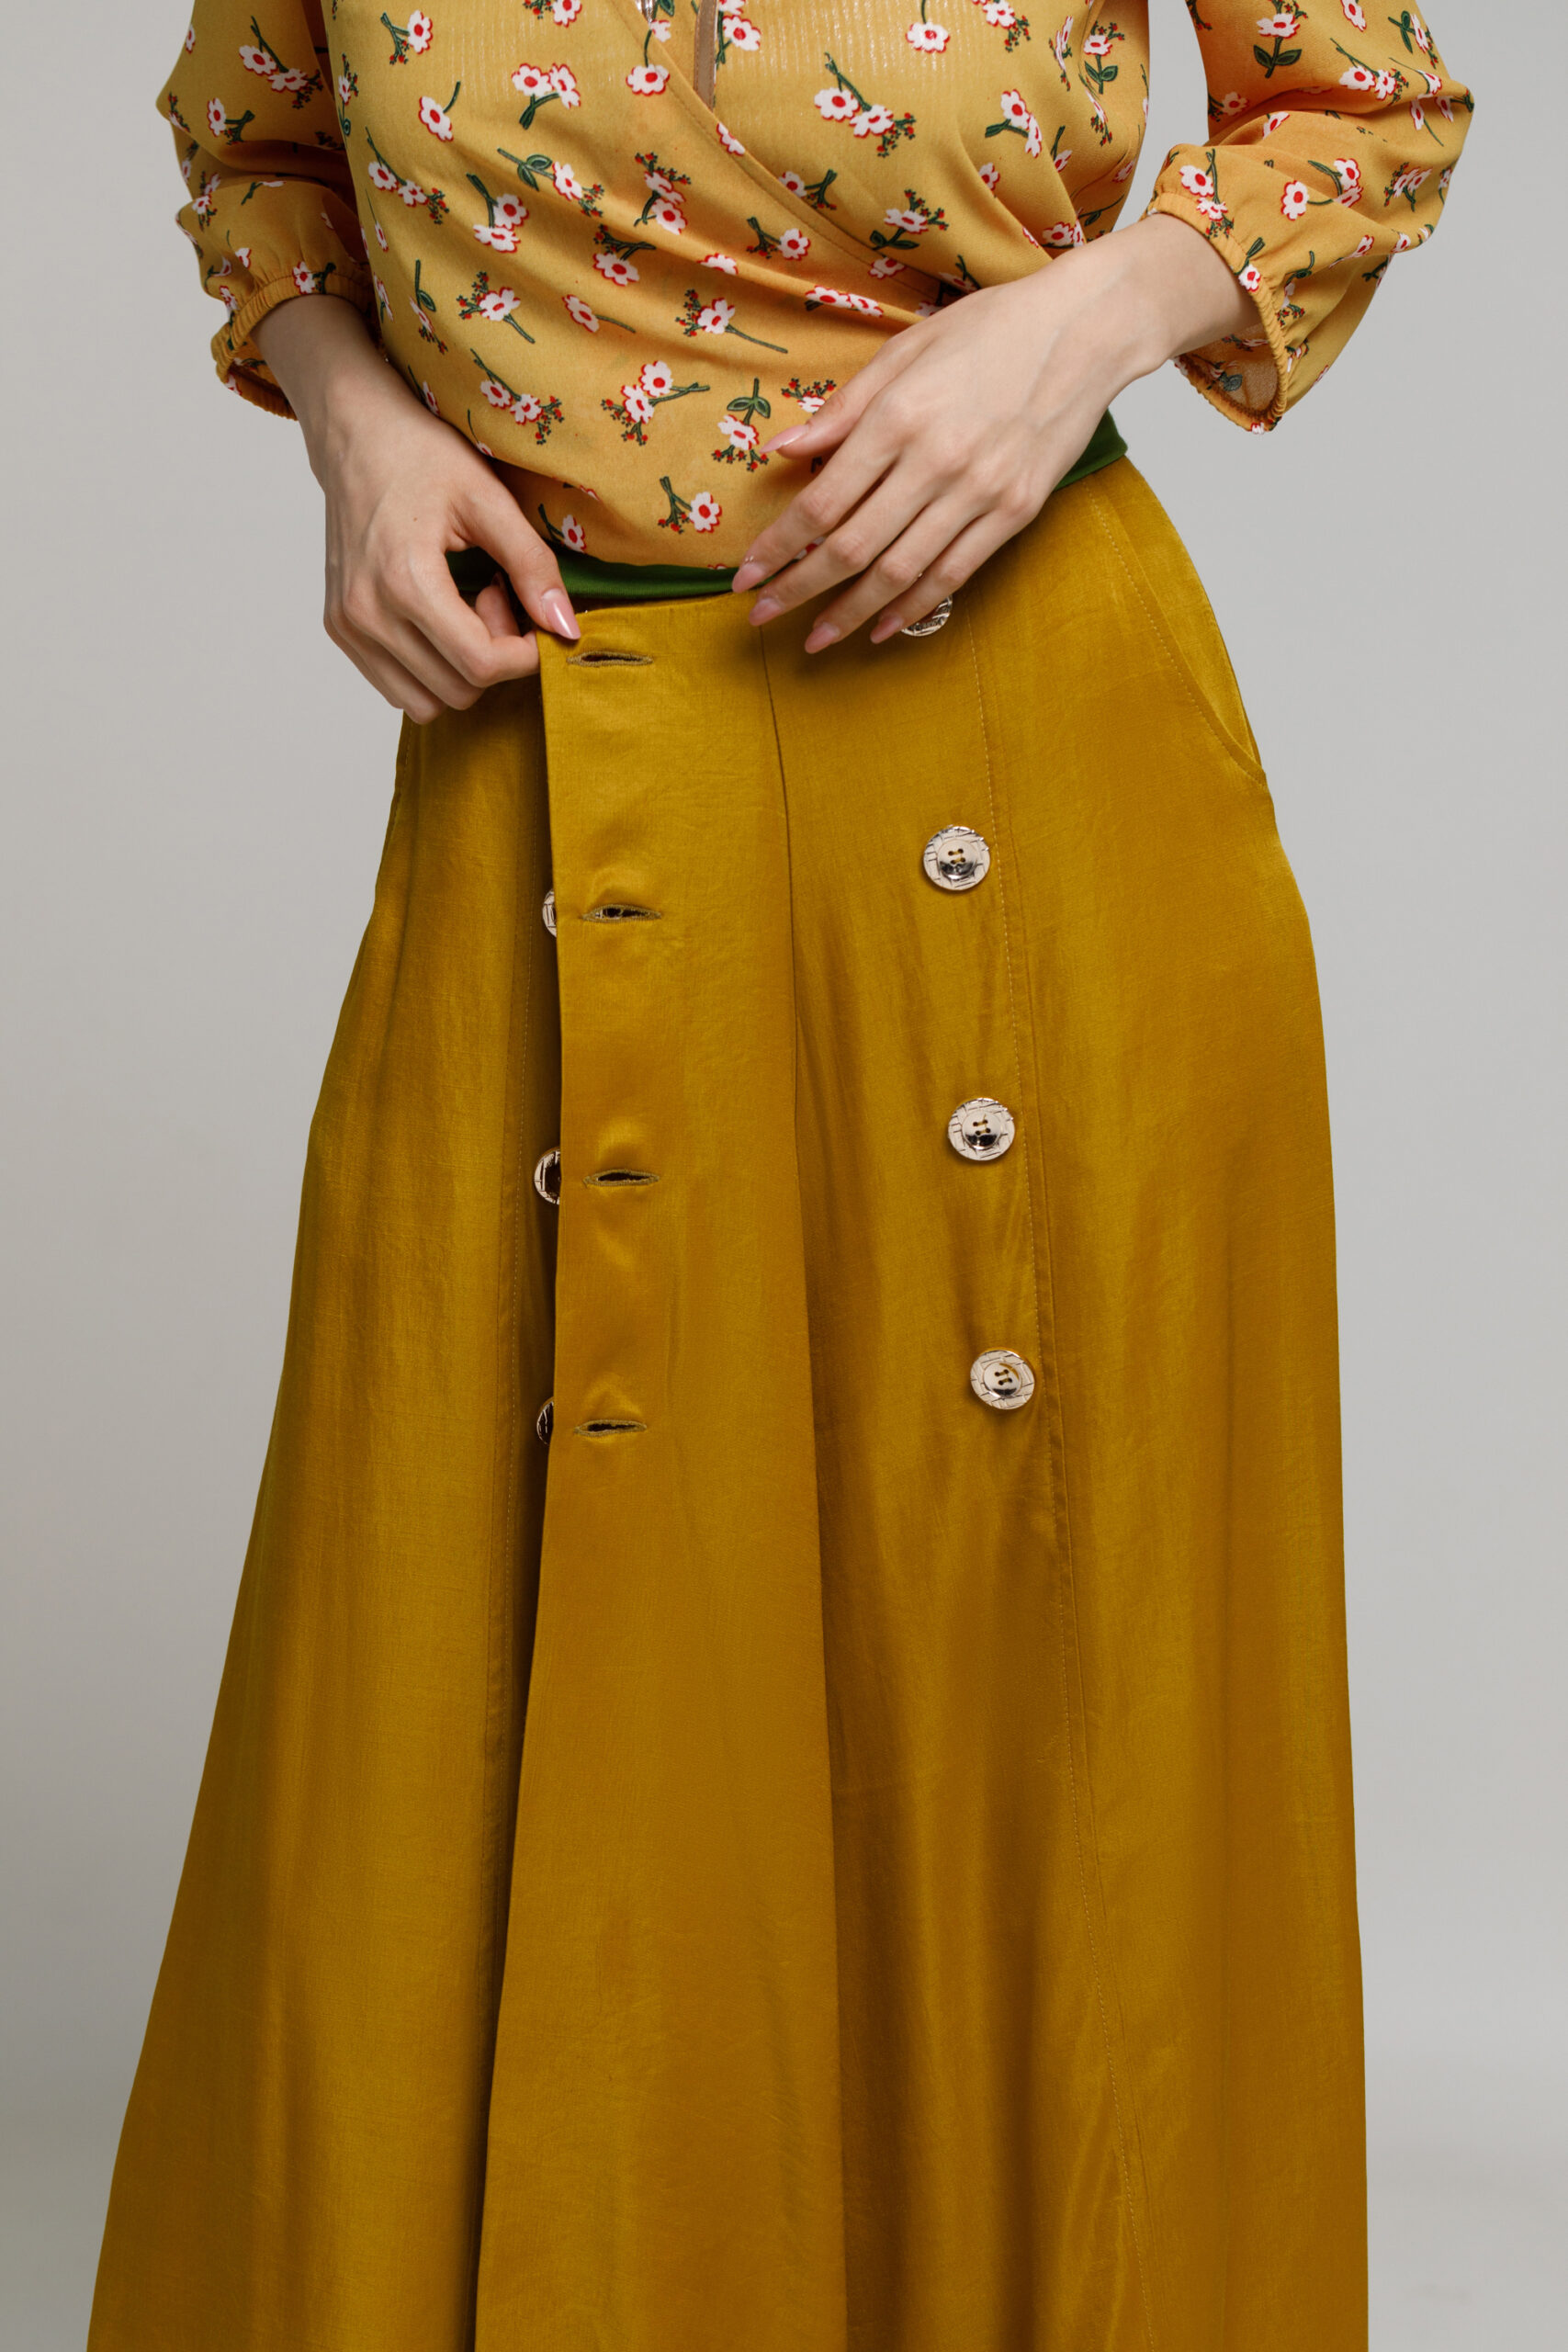 NEVIN Skirt - long trousers with two rows of buttons. Natural fabrics, original design, handmade embroidery